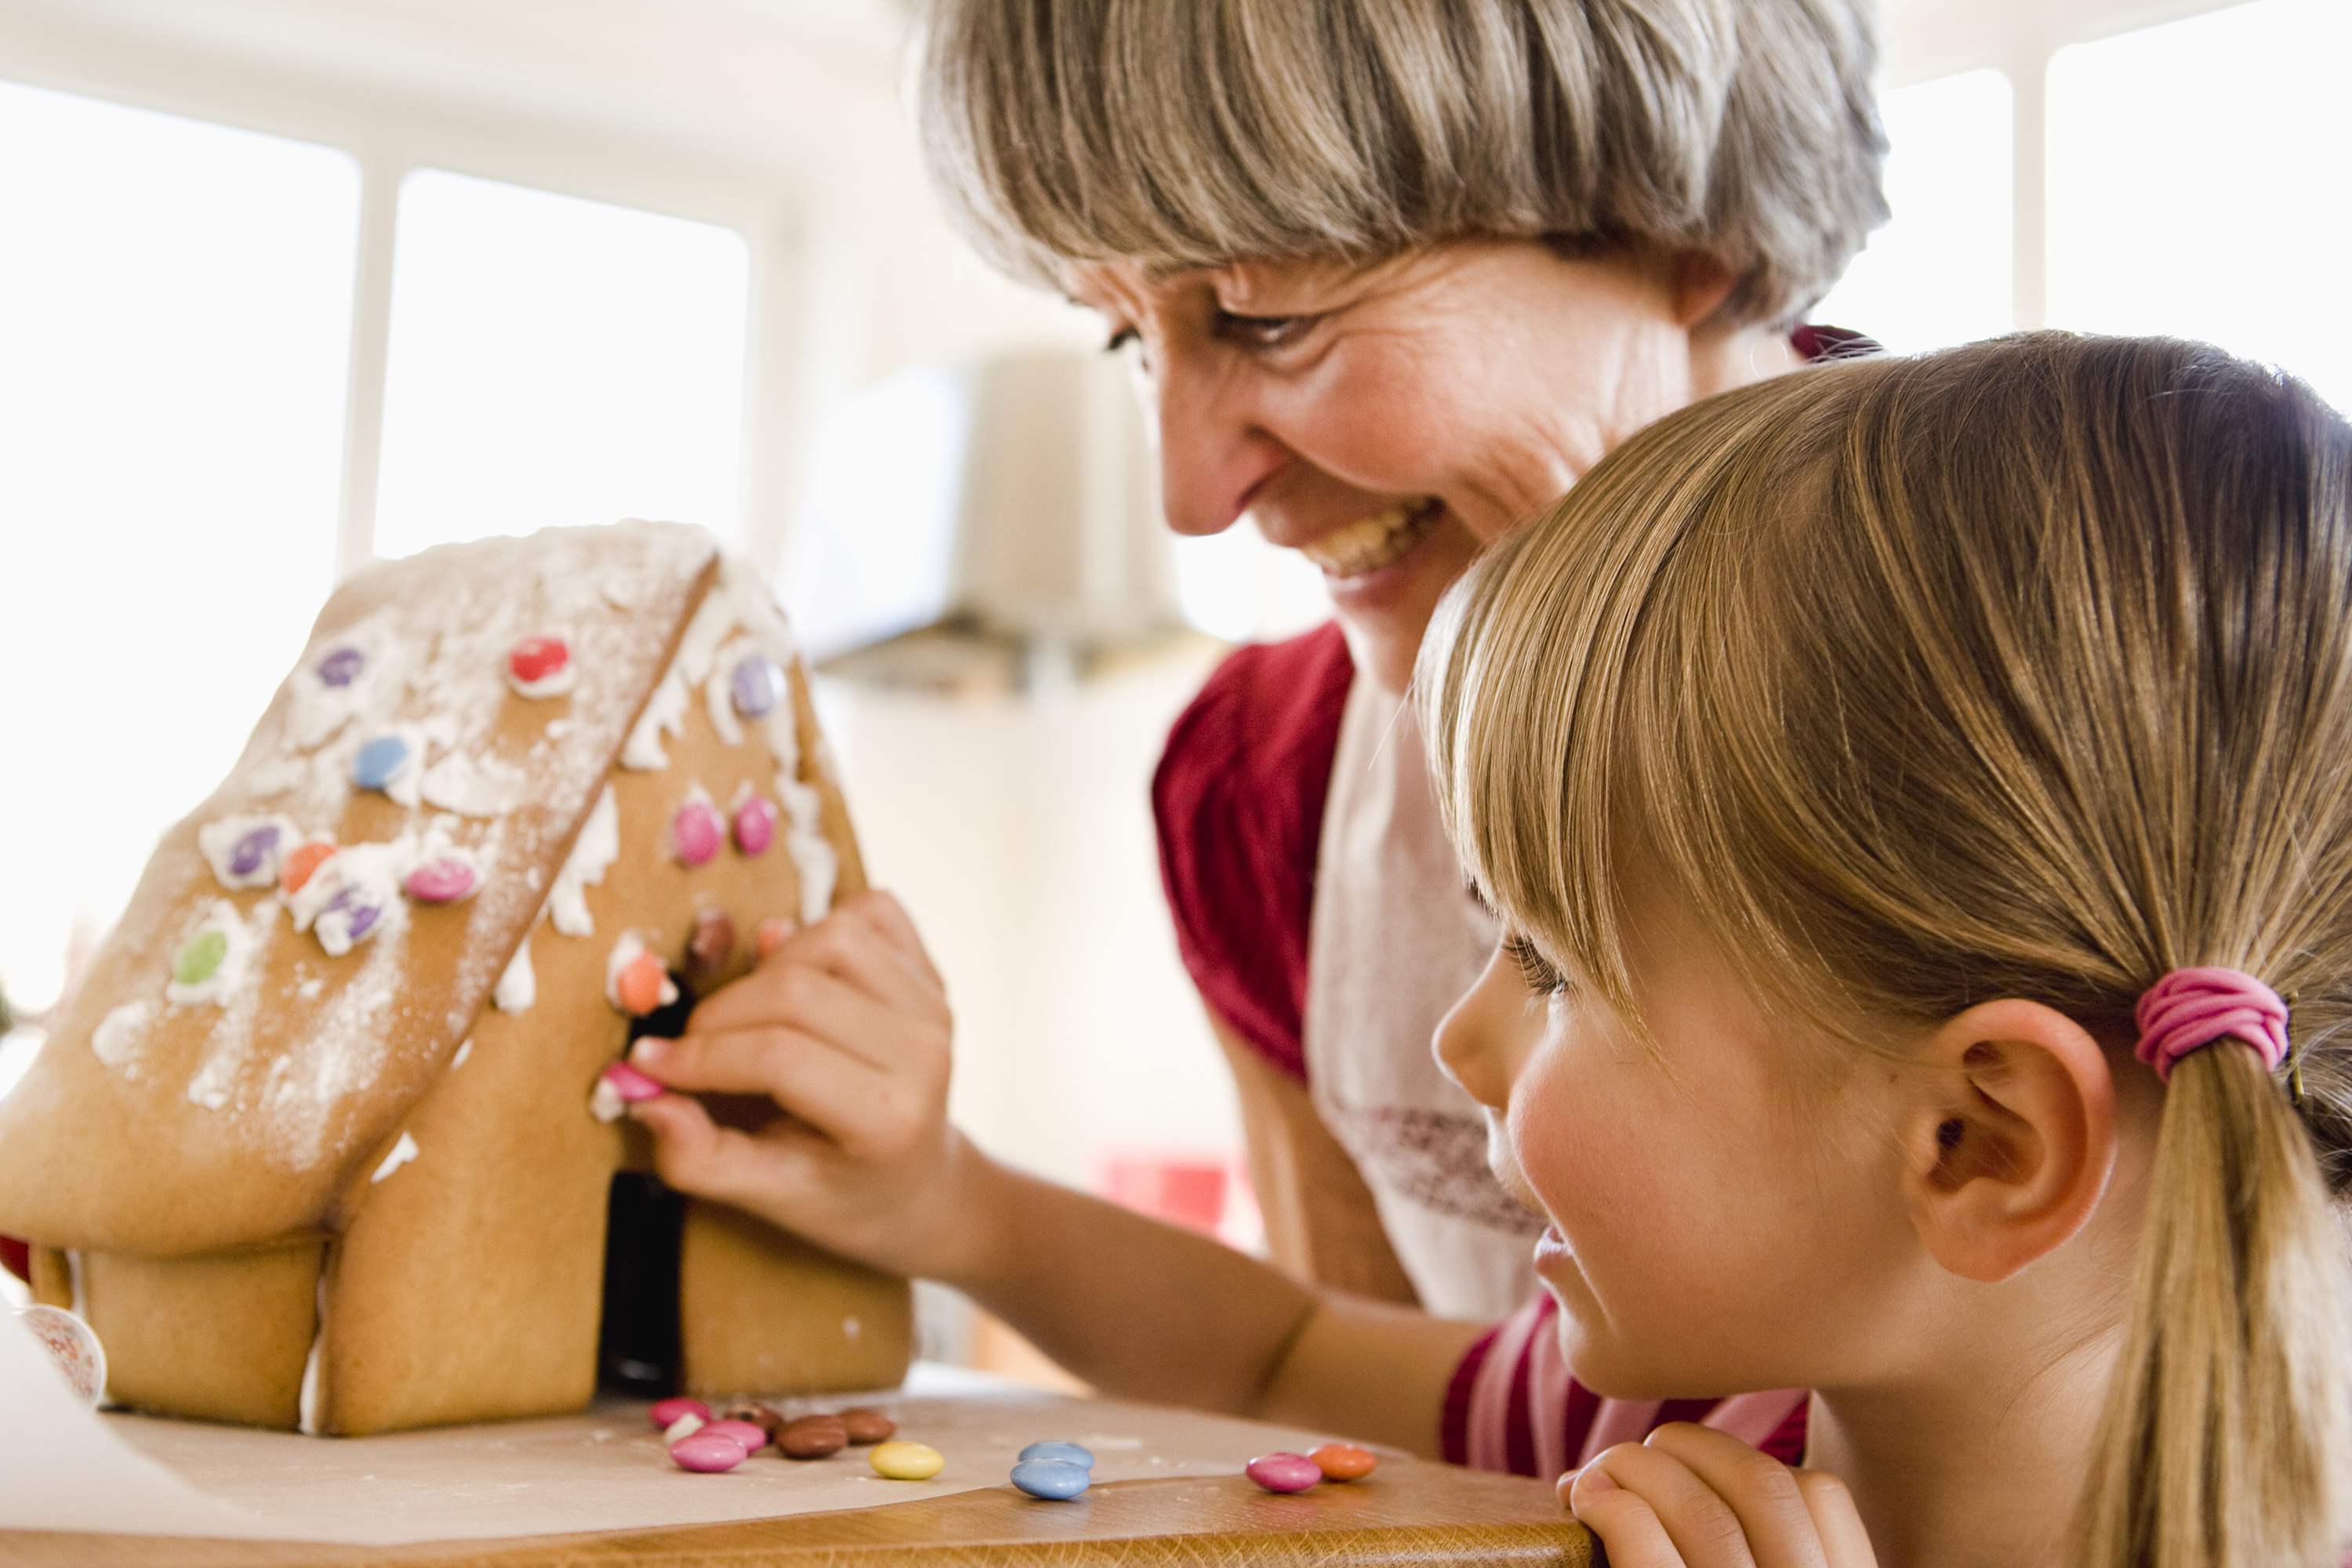 Grandma and granddaughter making a gingerbread house. (Getty Images)